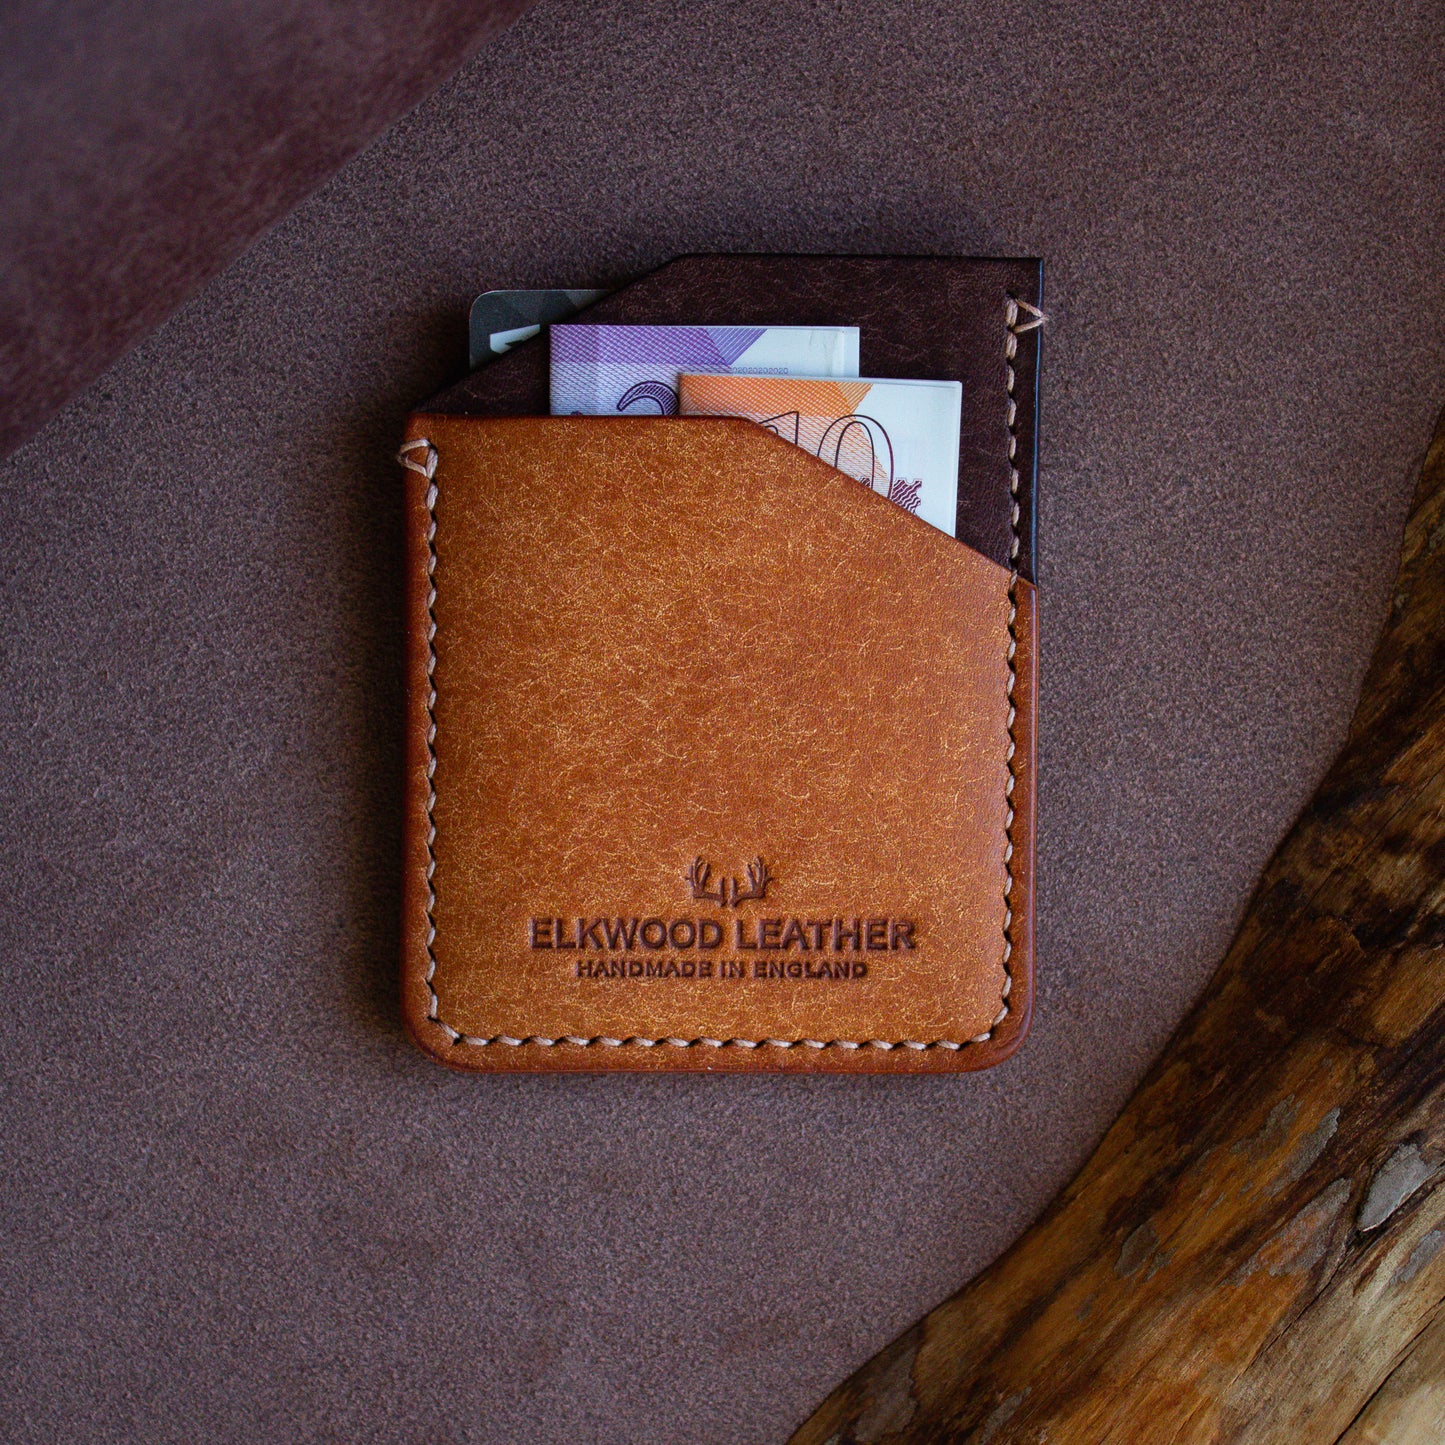 Elkwood Leather - The Maple - minimalist full grain Italian Pueblo leather cardholder wallet with credit cards and cash on roll of leather next to wood grain